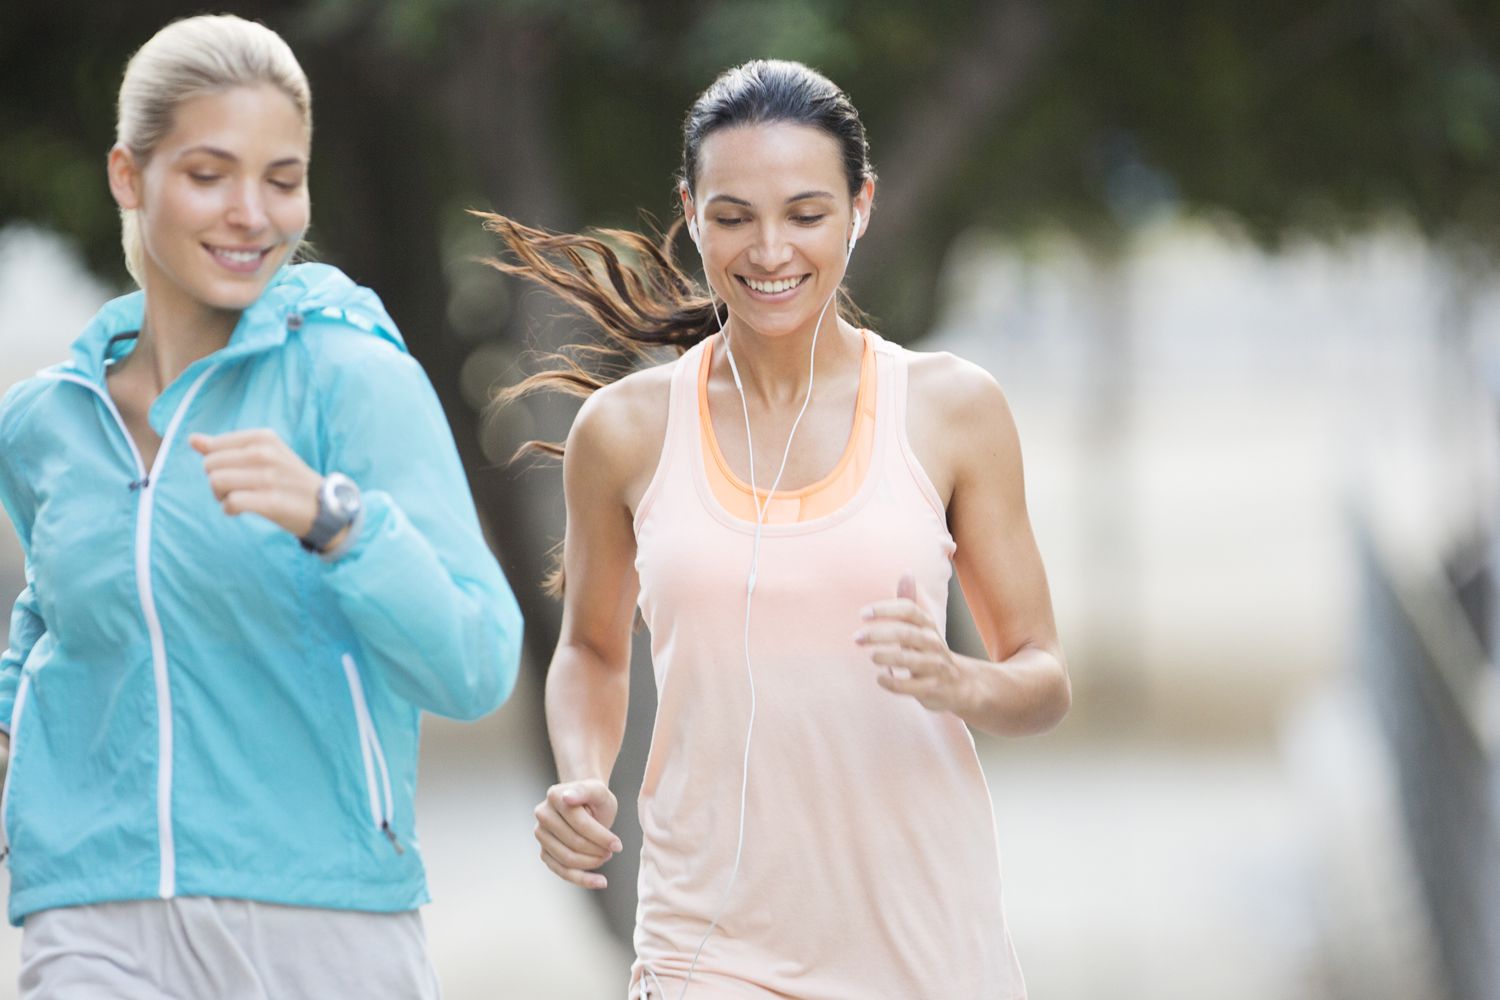 Two woman out for a run together.